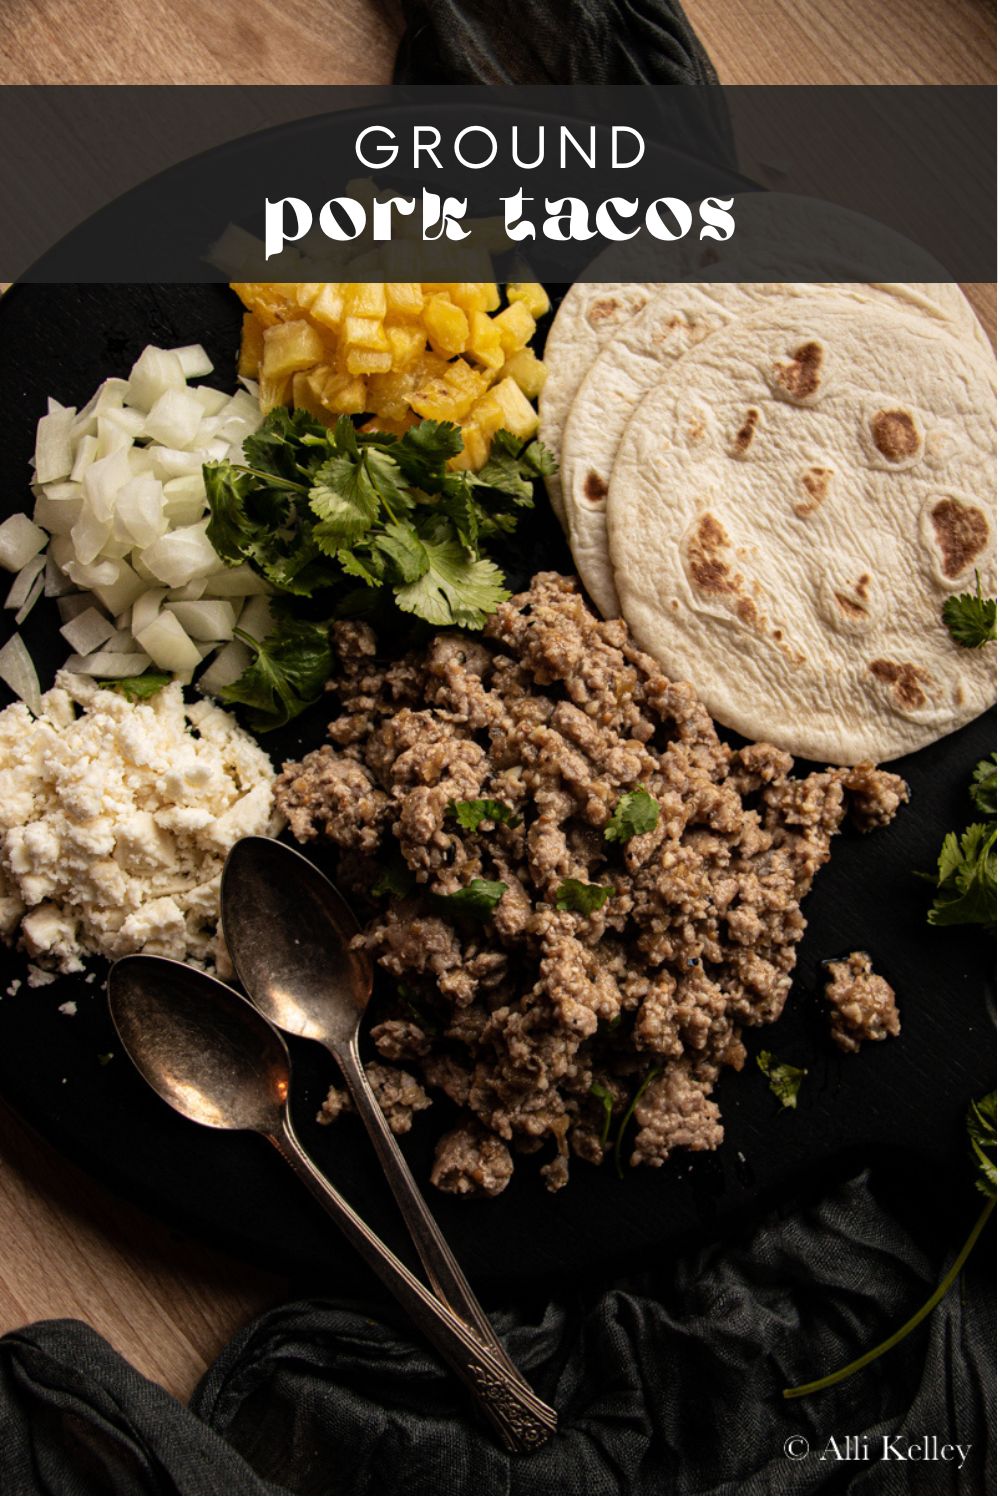 Food is one way to experience the world without leaving our homes, and these pork tacos let you do just that! Whether you want to reminisce about a favorite vacation or just try something new, ground pork tacos are the perfect way to spice up your dinner routine. Plus, they're packed with flavor and super easy to make too!